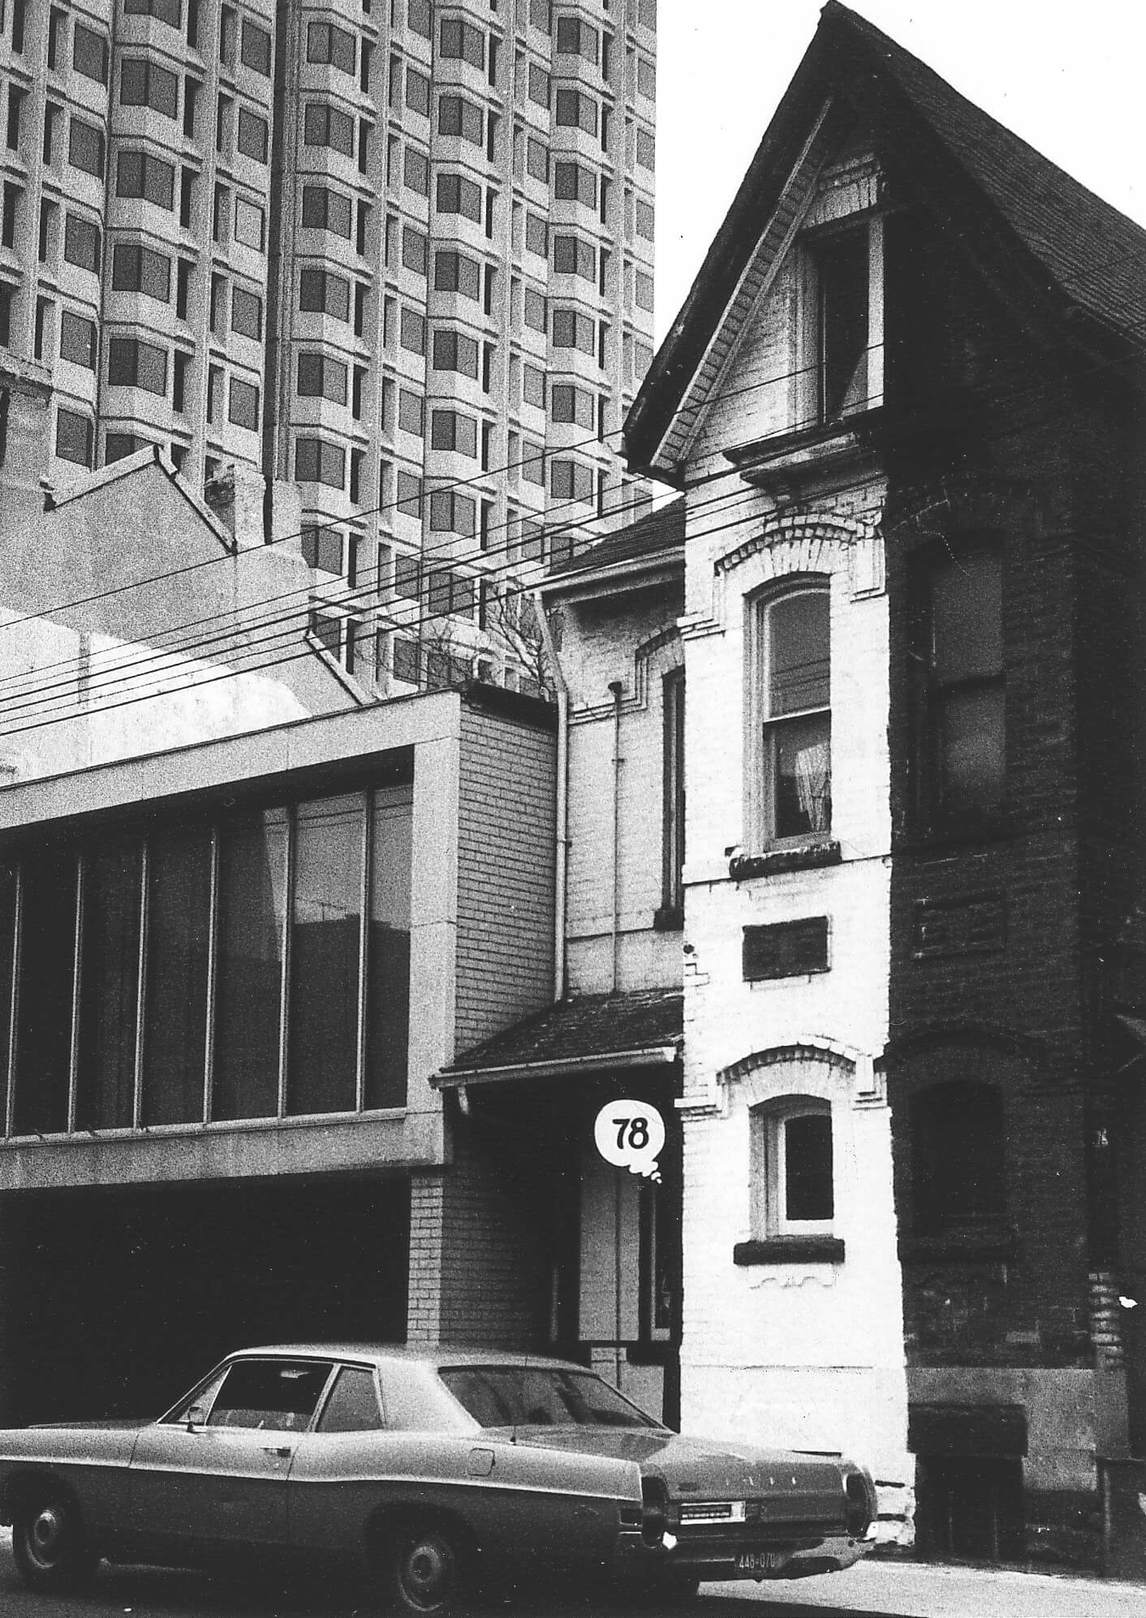 Art Canada Institute, 78 Gerrard Street West, Toronto, the house where General Idea formed and lived from 1969–70